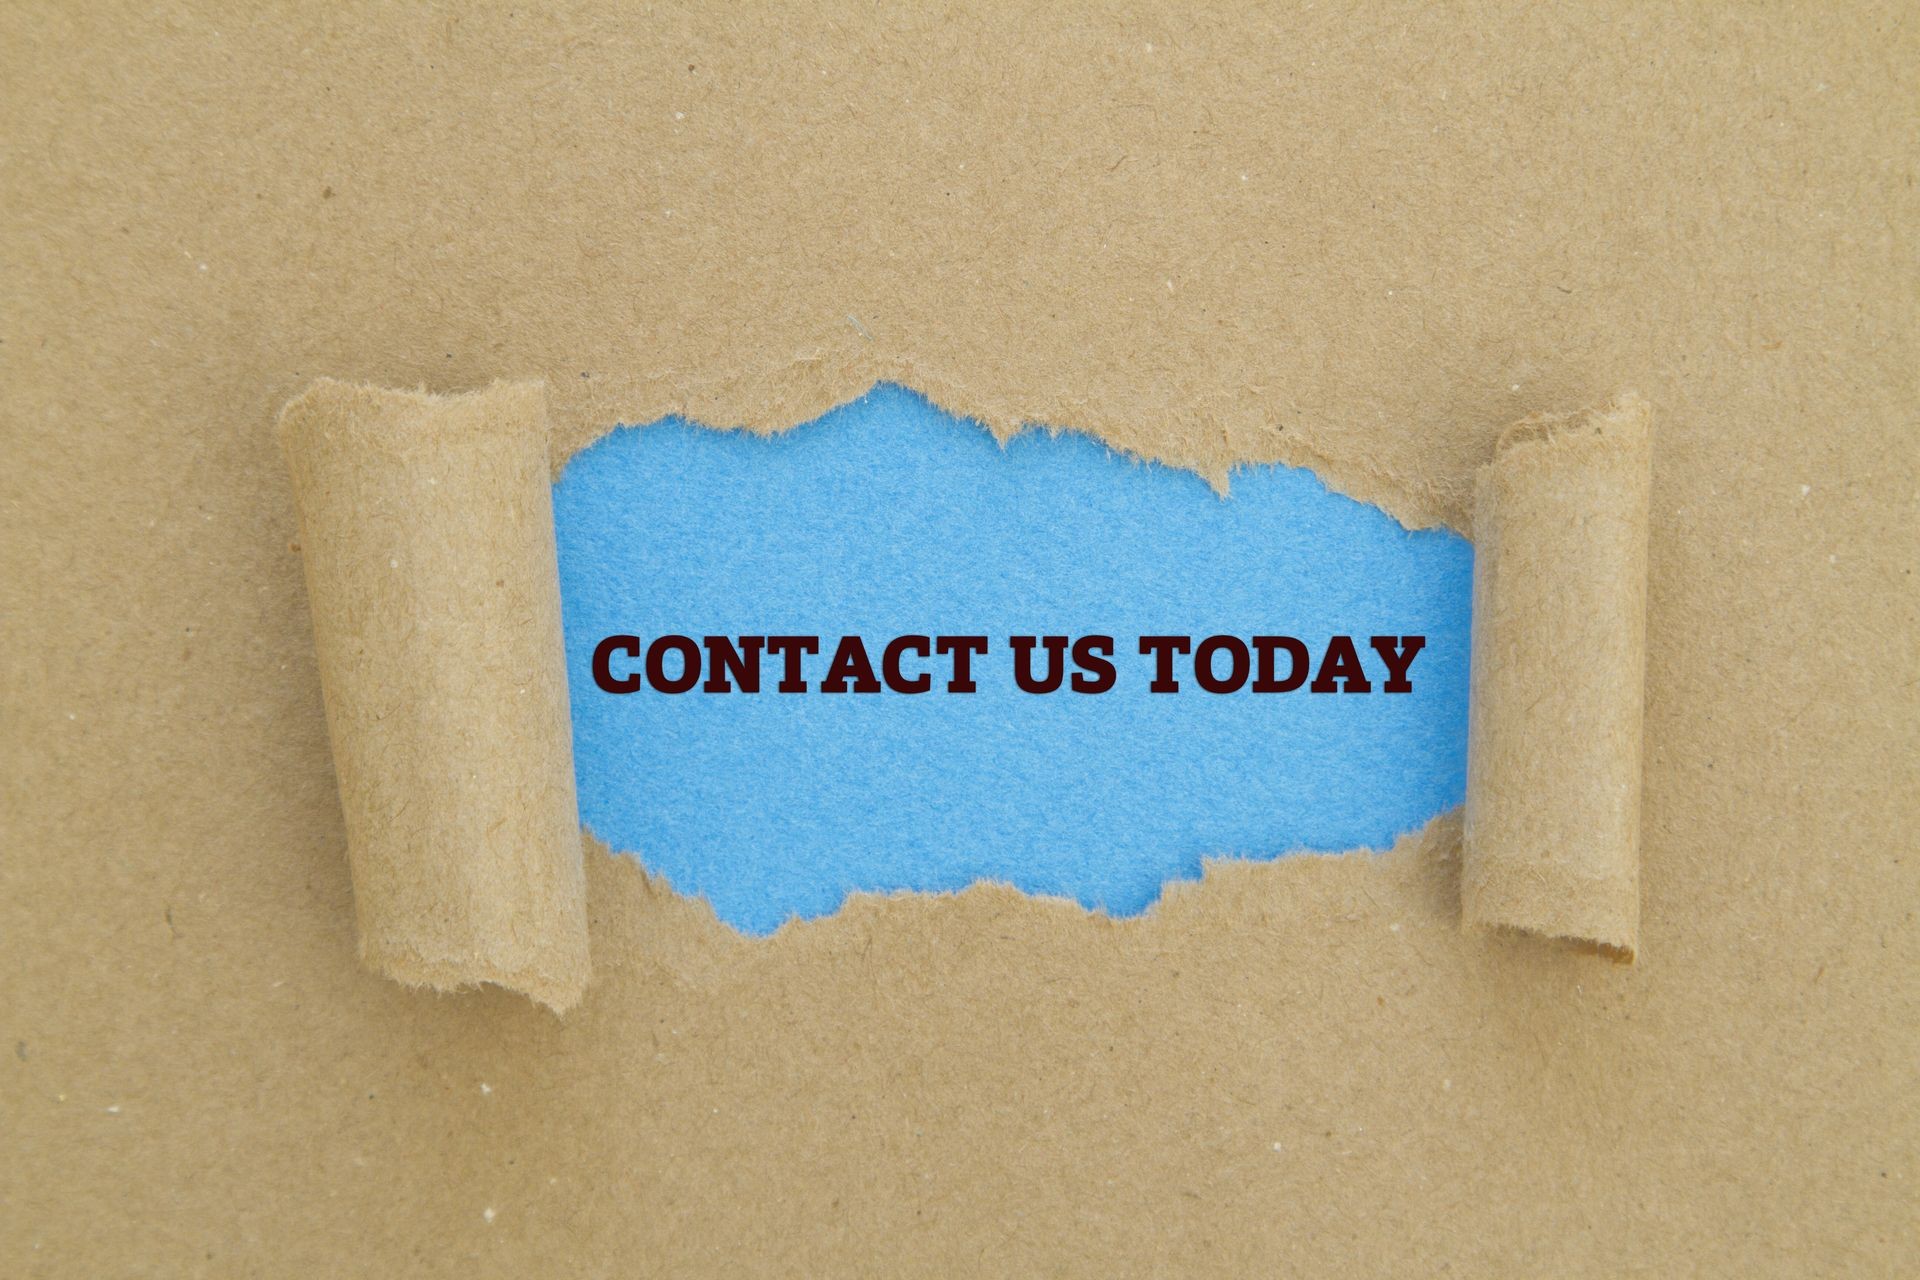 CONTACT US TODAY written under torn paper.